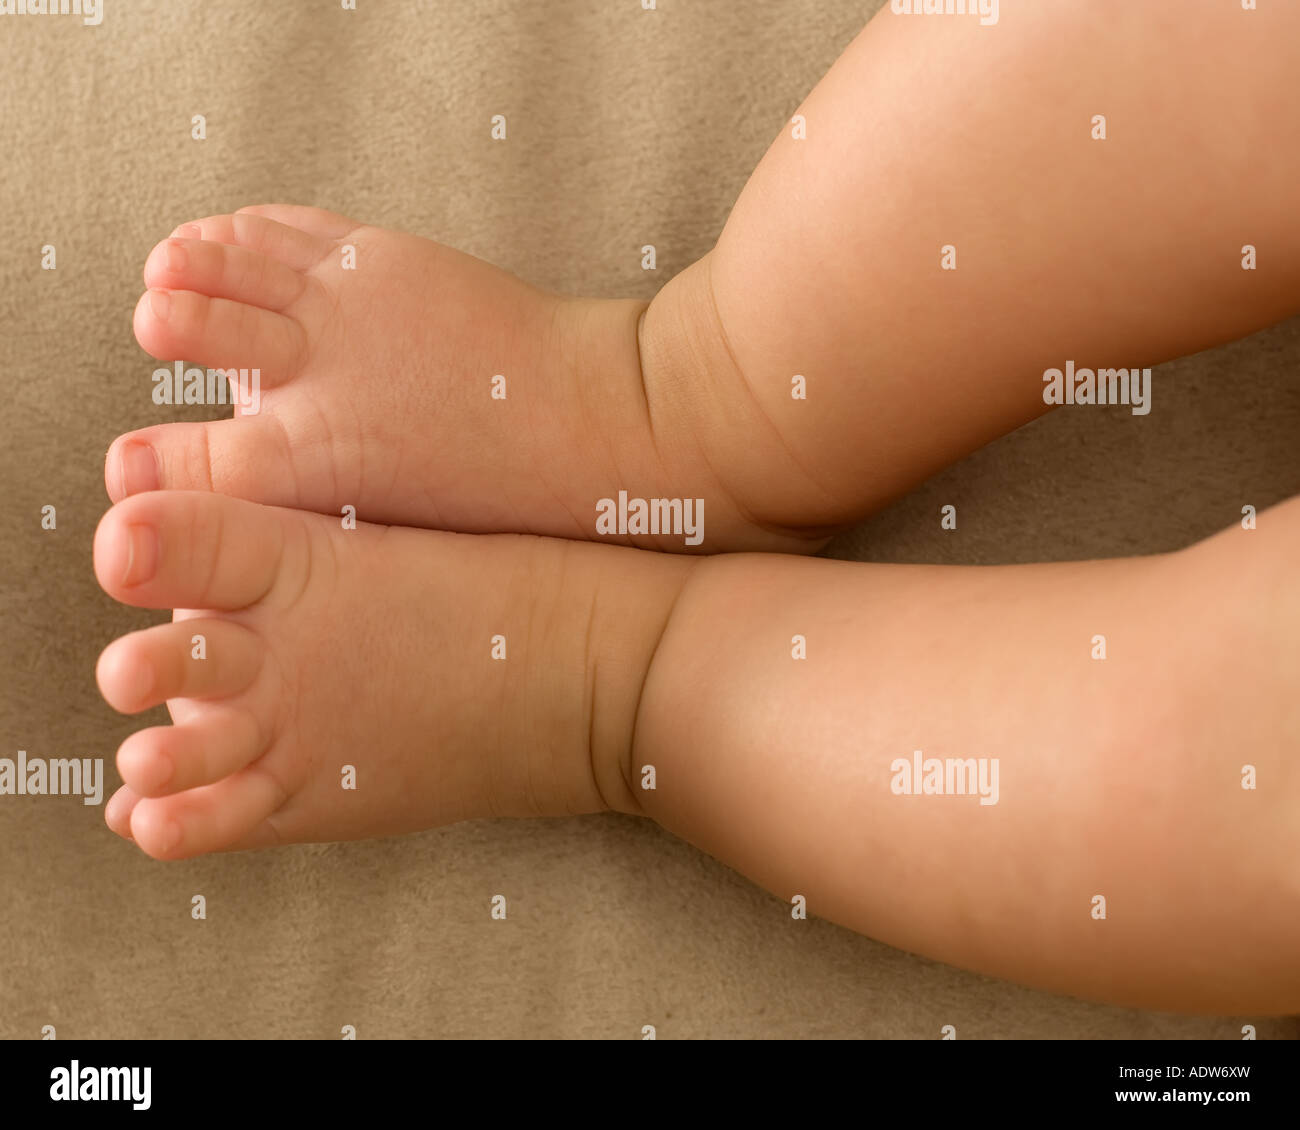 Baby feet with suede fabric as background Stock Photo